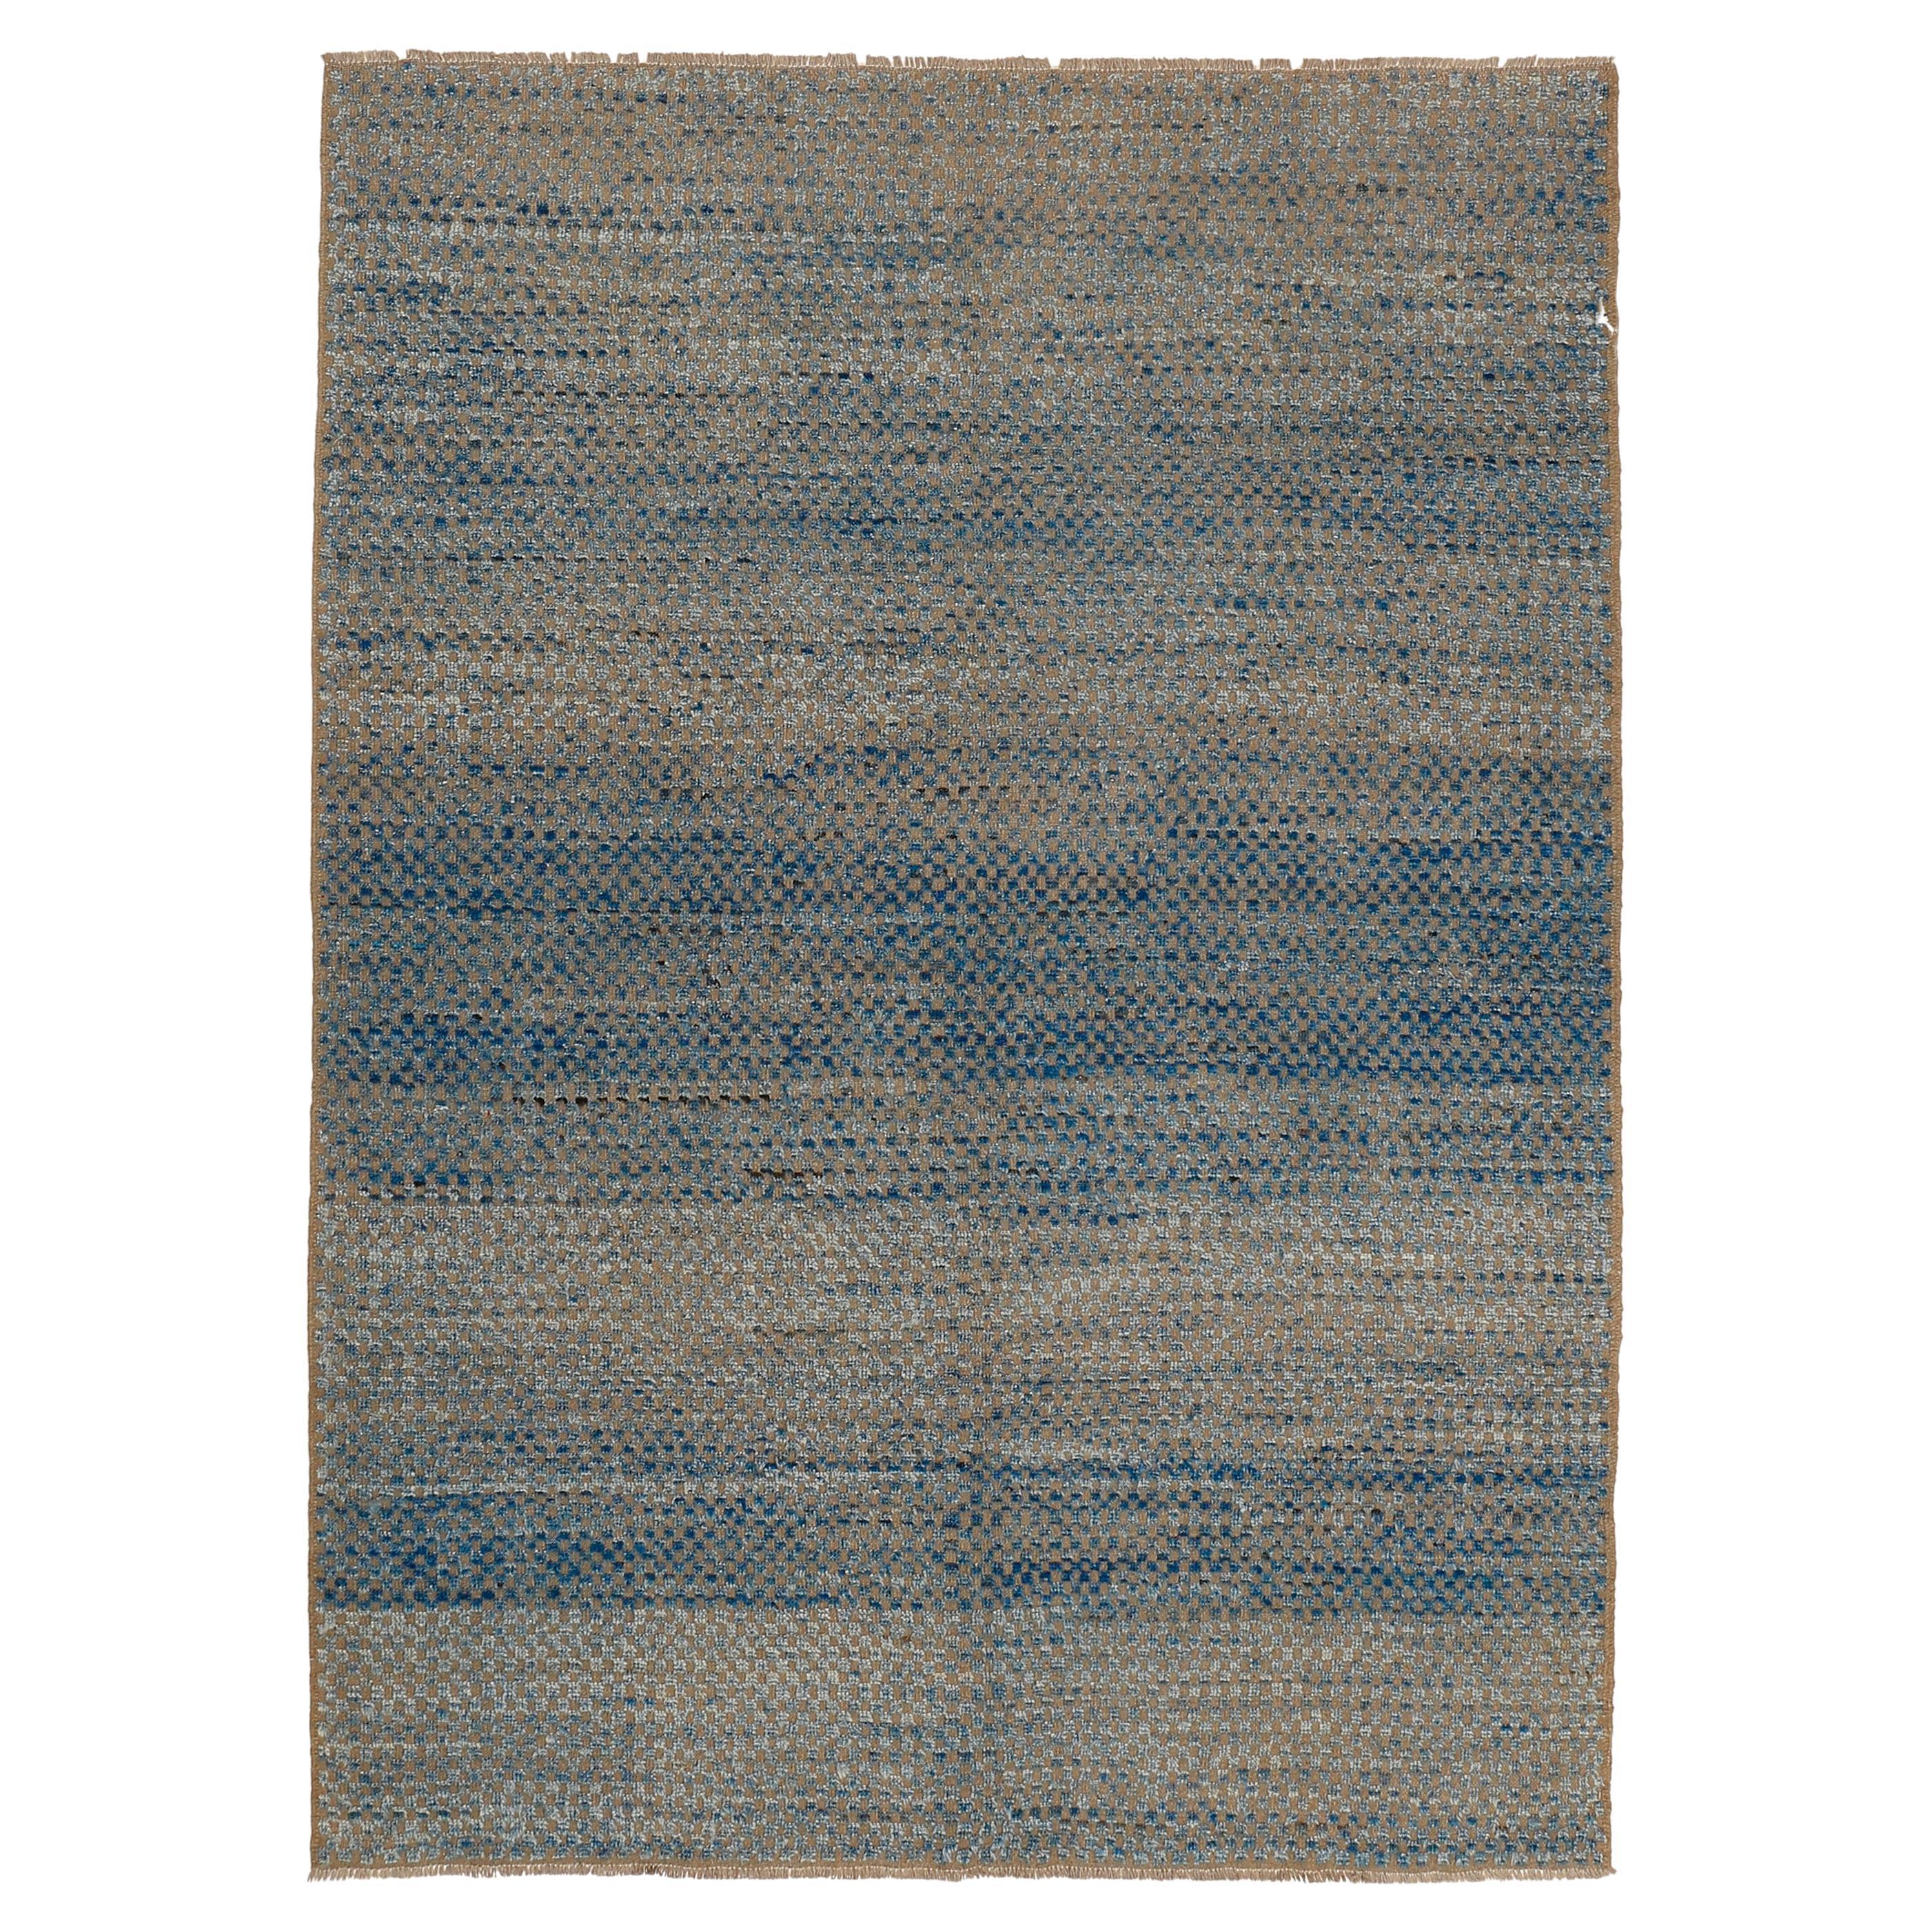 Moroccan Inspired Tuareg Blue Rug by Alberto Levi Gallery For Sale